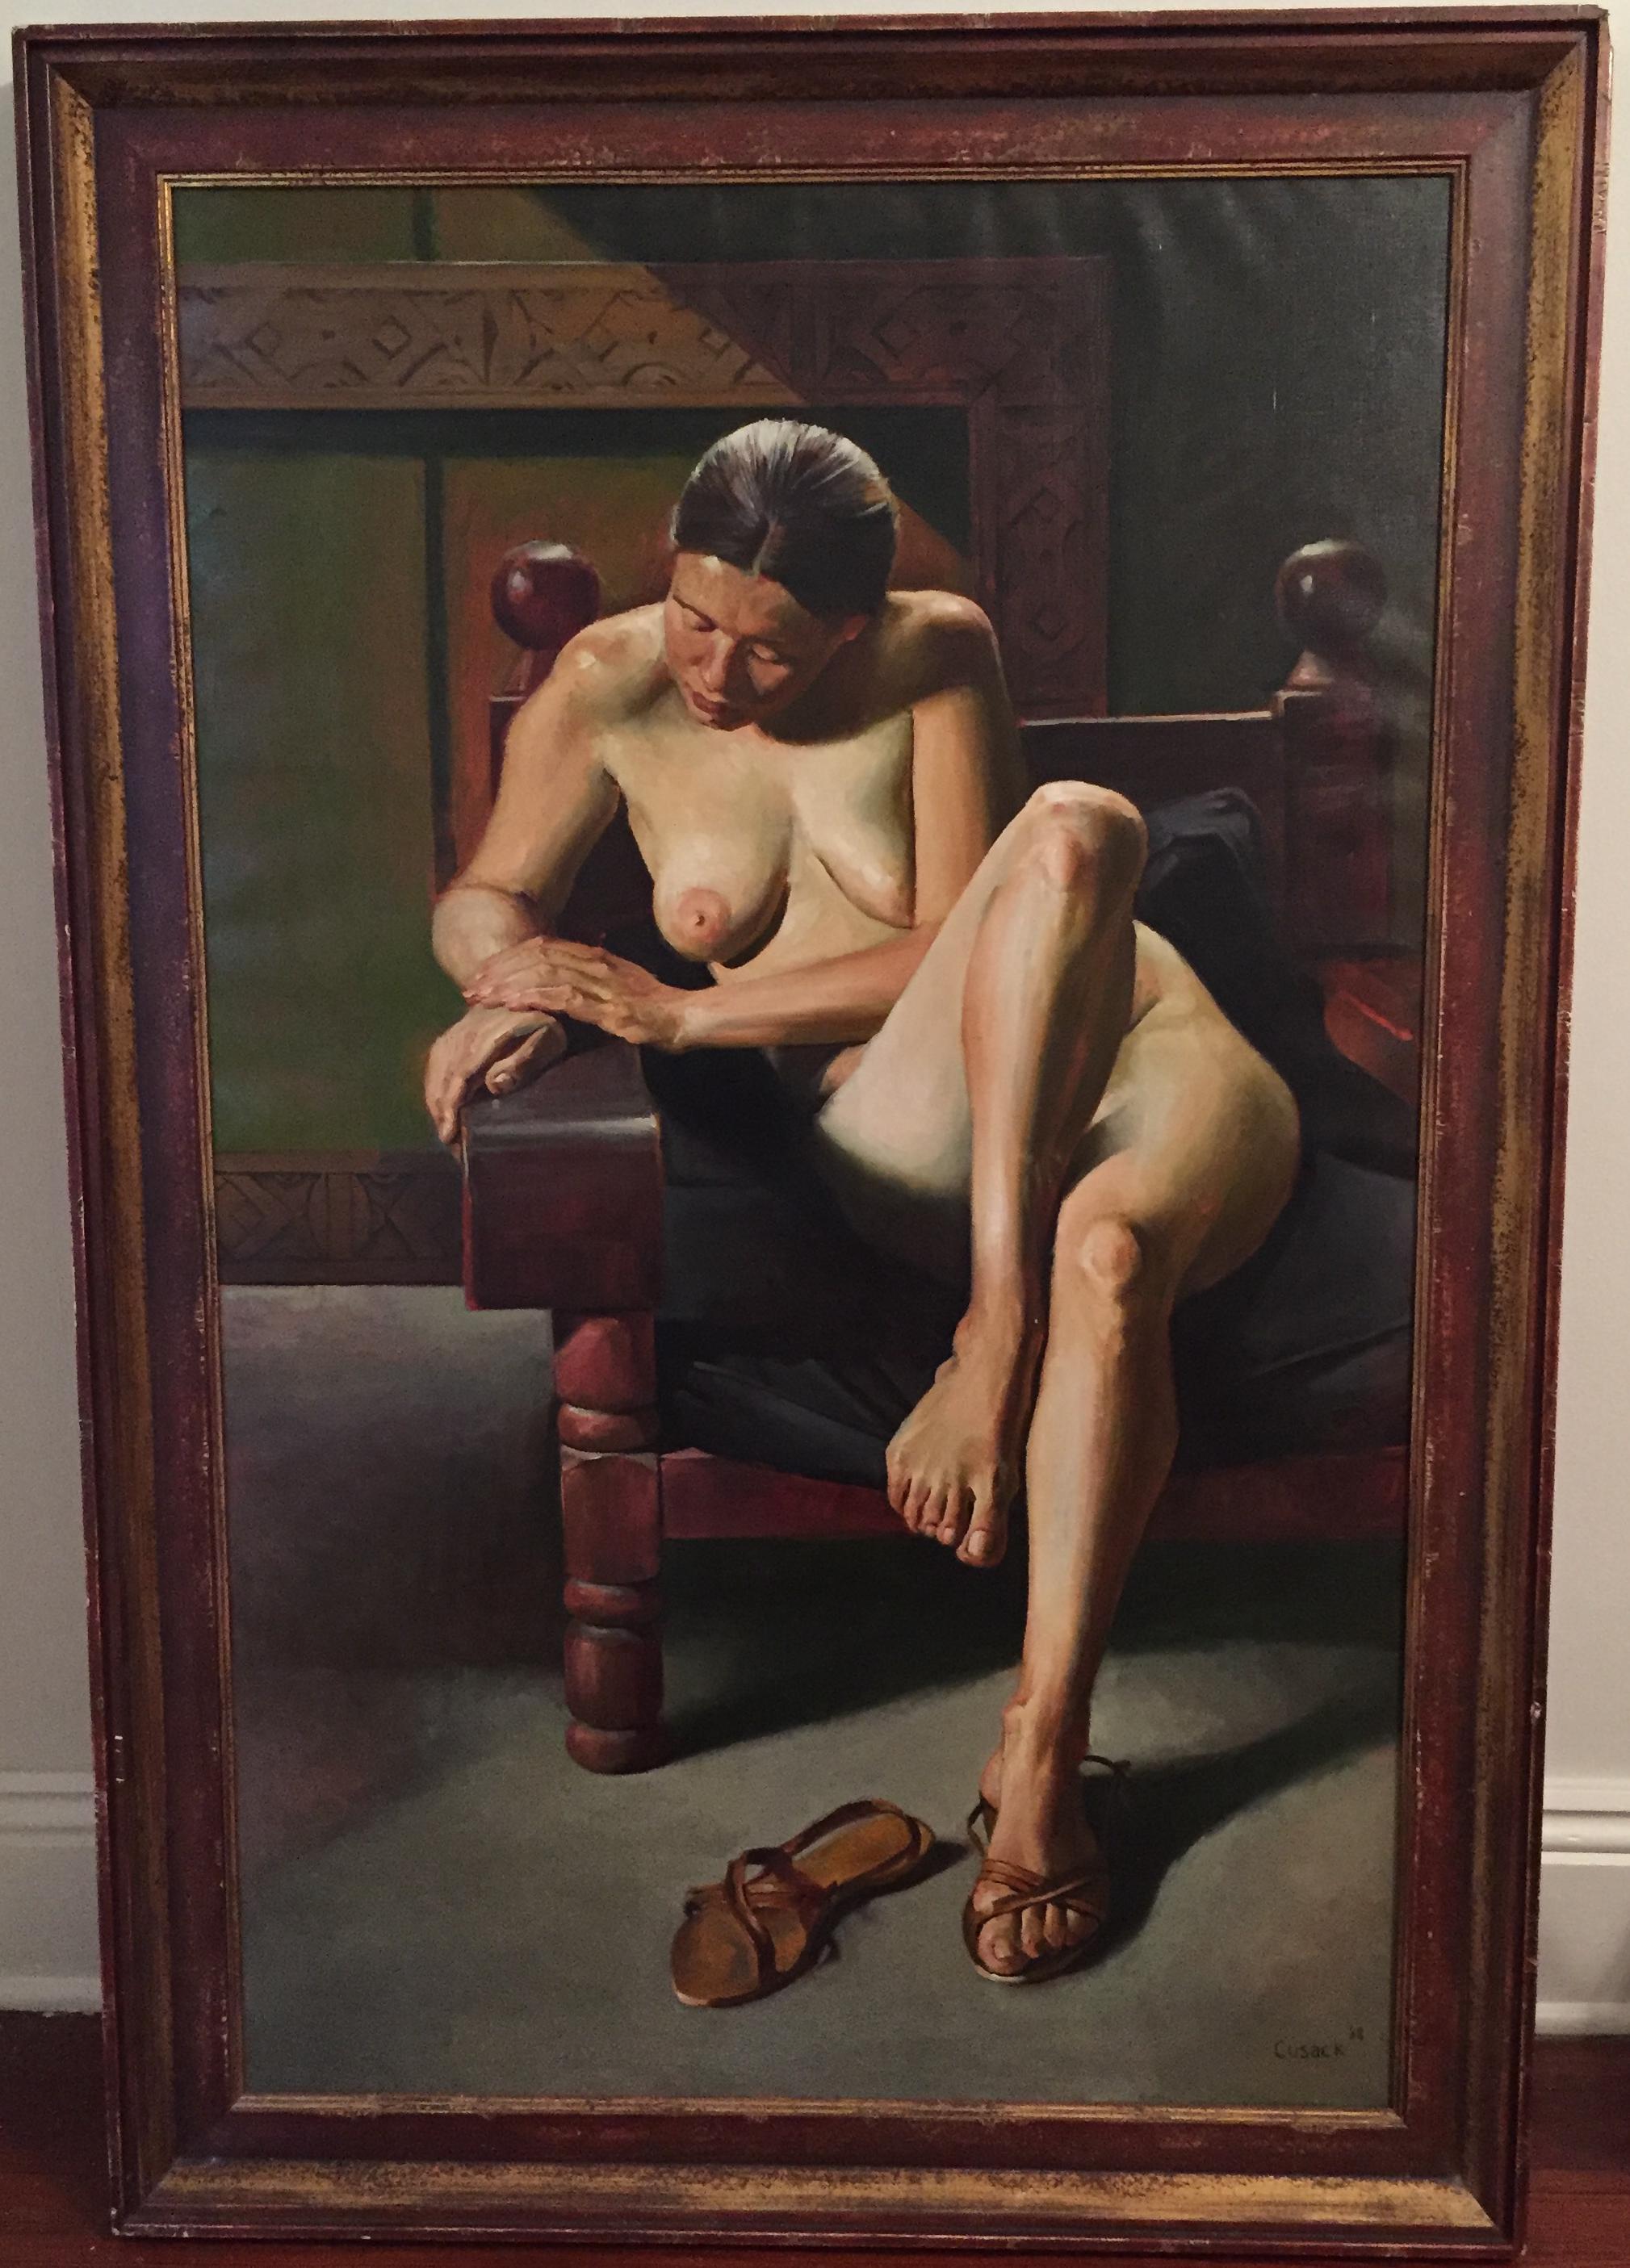 A very large, astonishingly well-painted and striking Modernist nude of a woman seated in a broad chair by artist Eugene Cusack - a name tracked down for me by a savvy 1stDibs collector, for which I am thankful!  This is many times larger than the